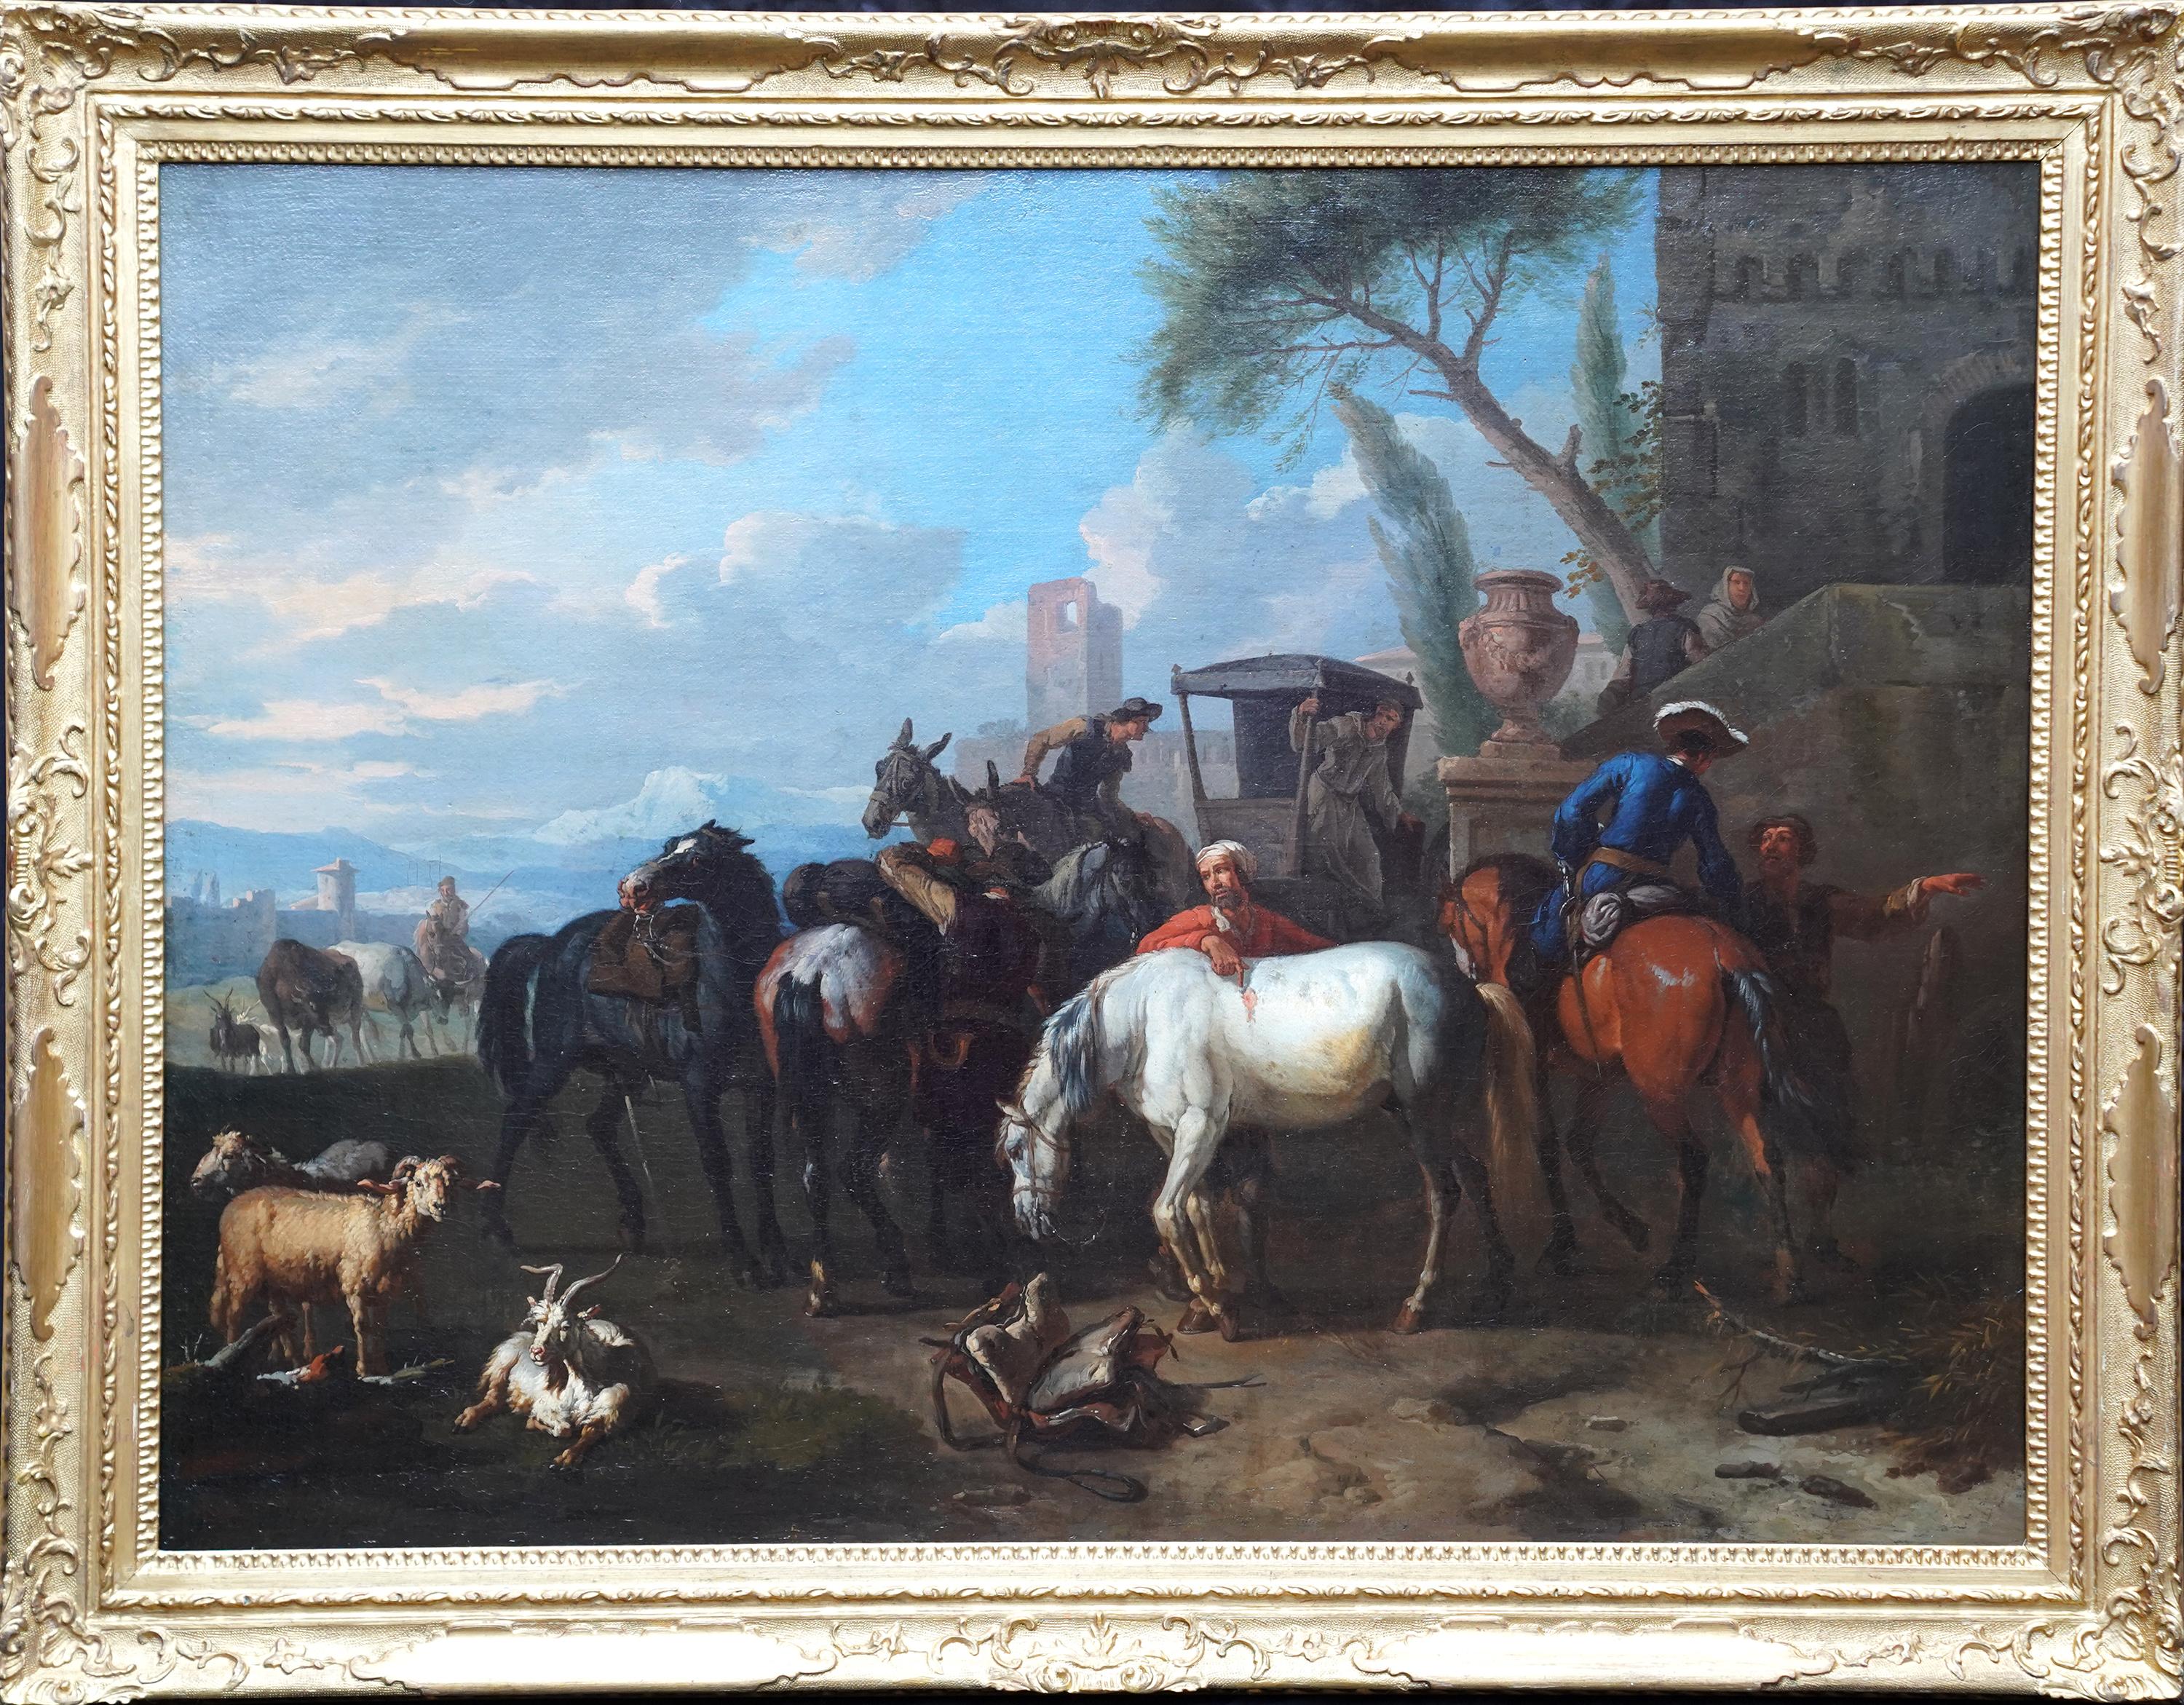 Travellers and Carriage in Landscape Dutch 17th century  Golden Age oil painting For Sale 13